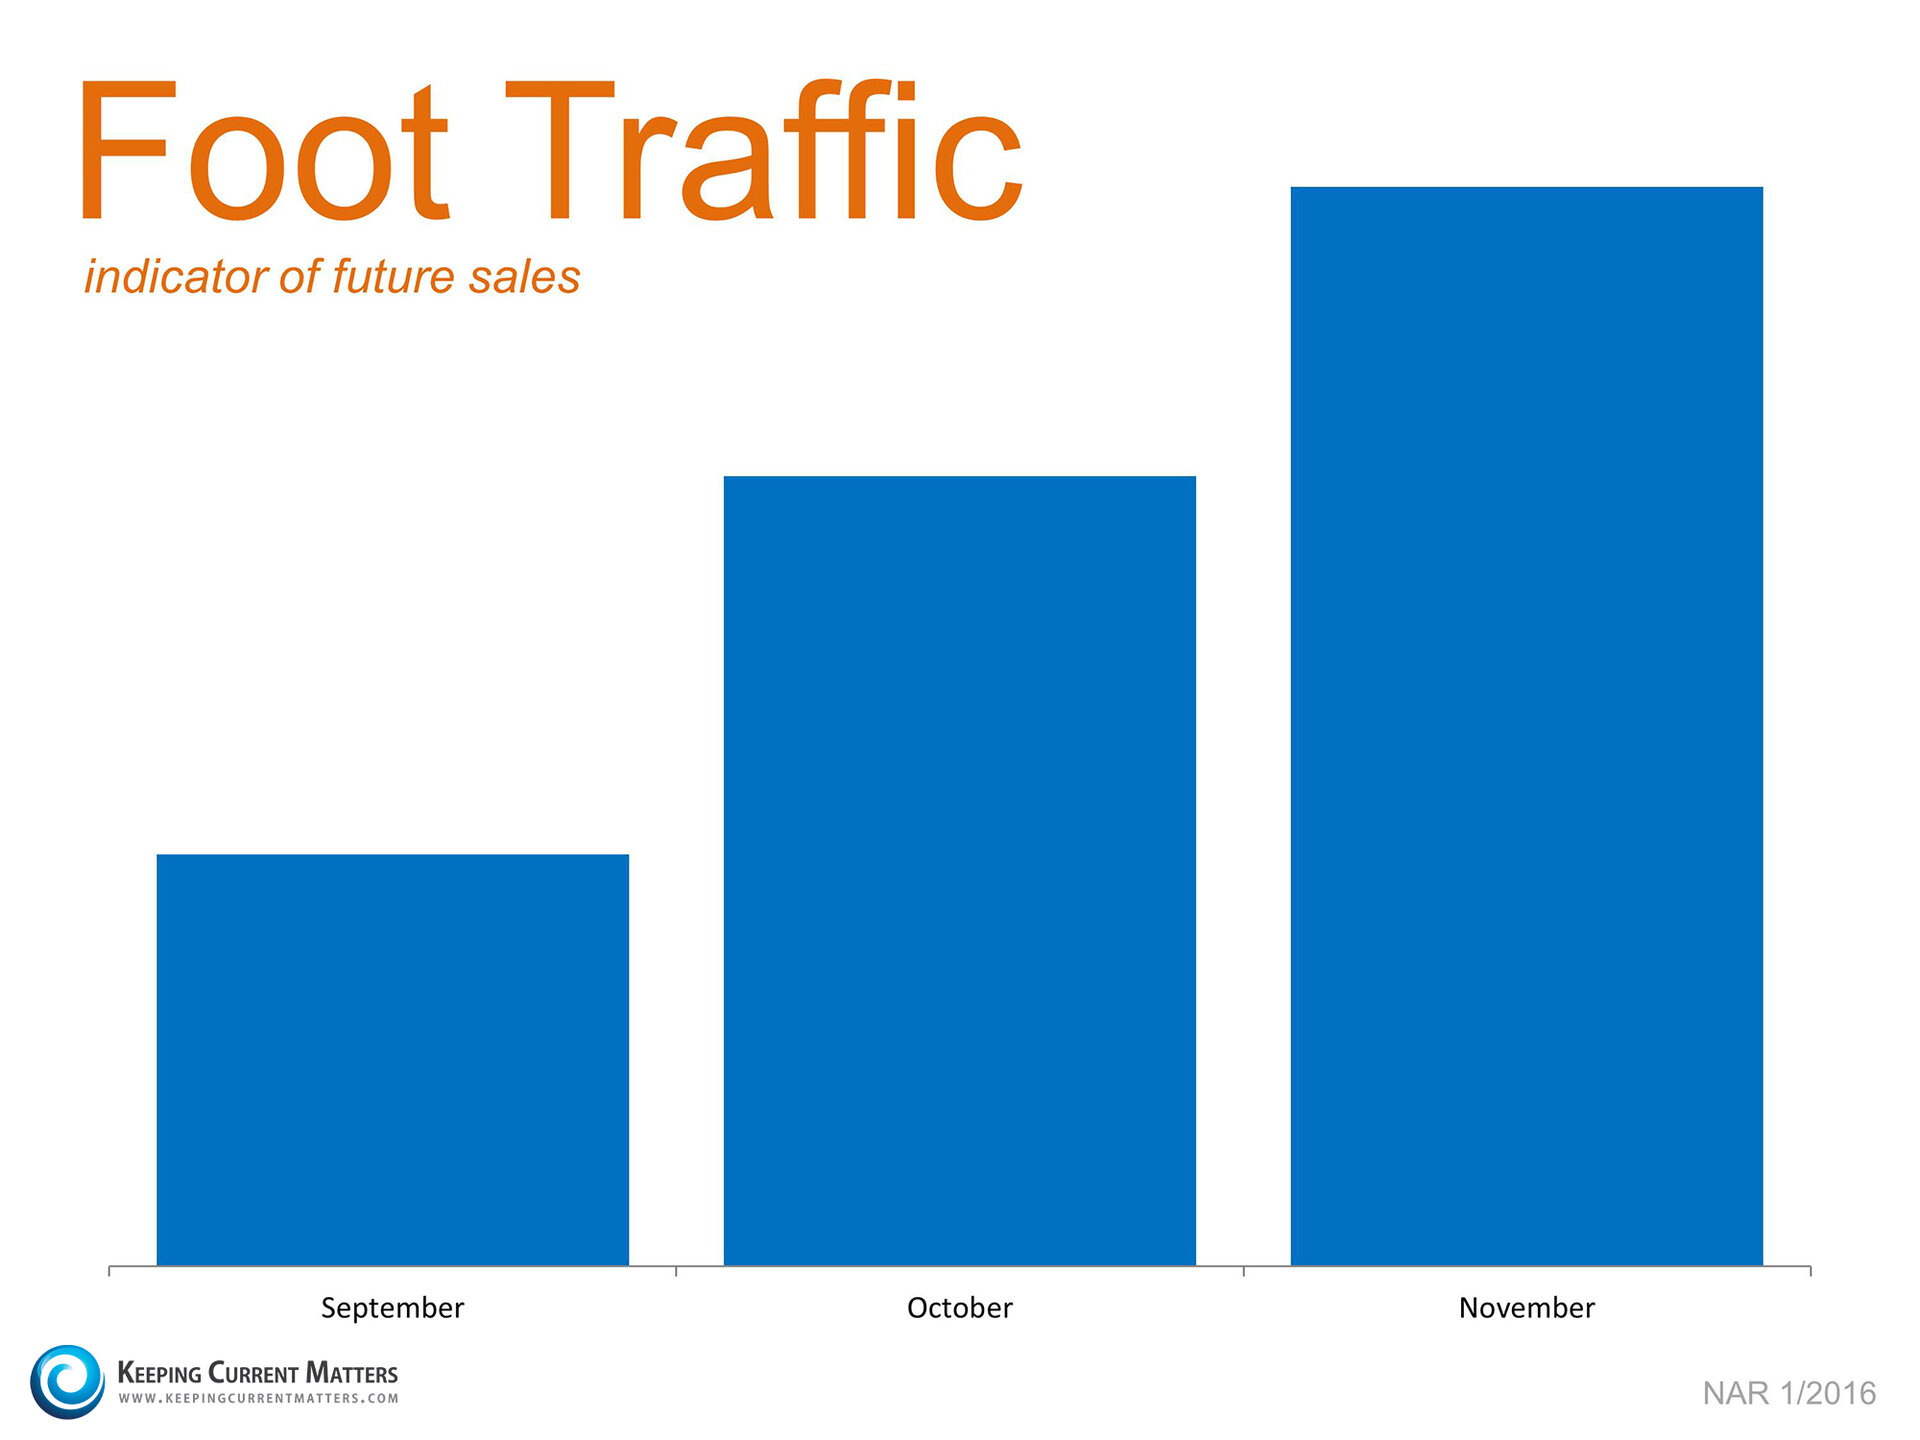 Foot Traffic Growing | Keeping Current Matters